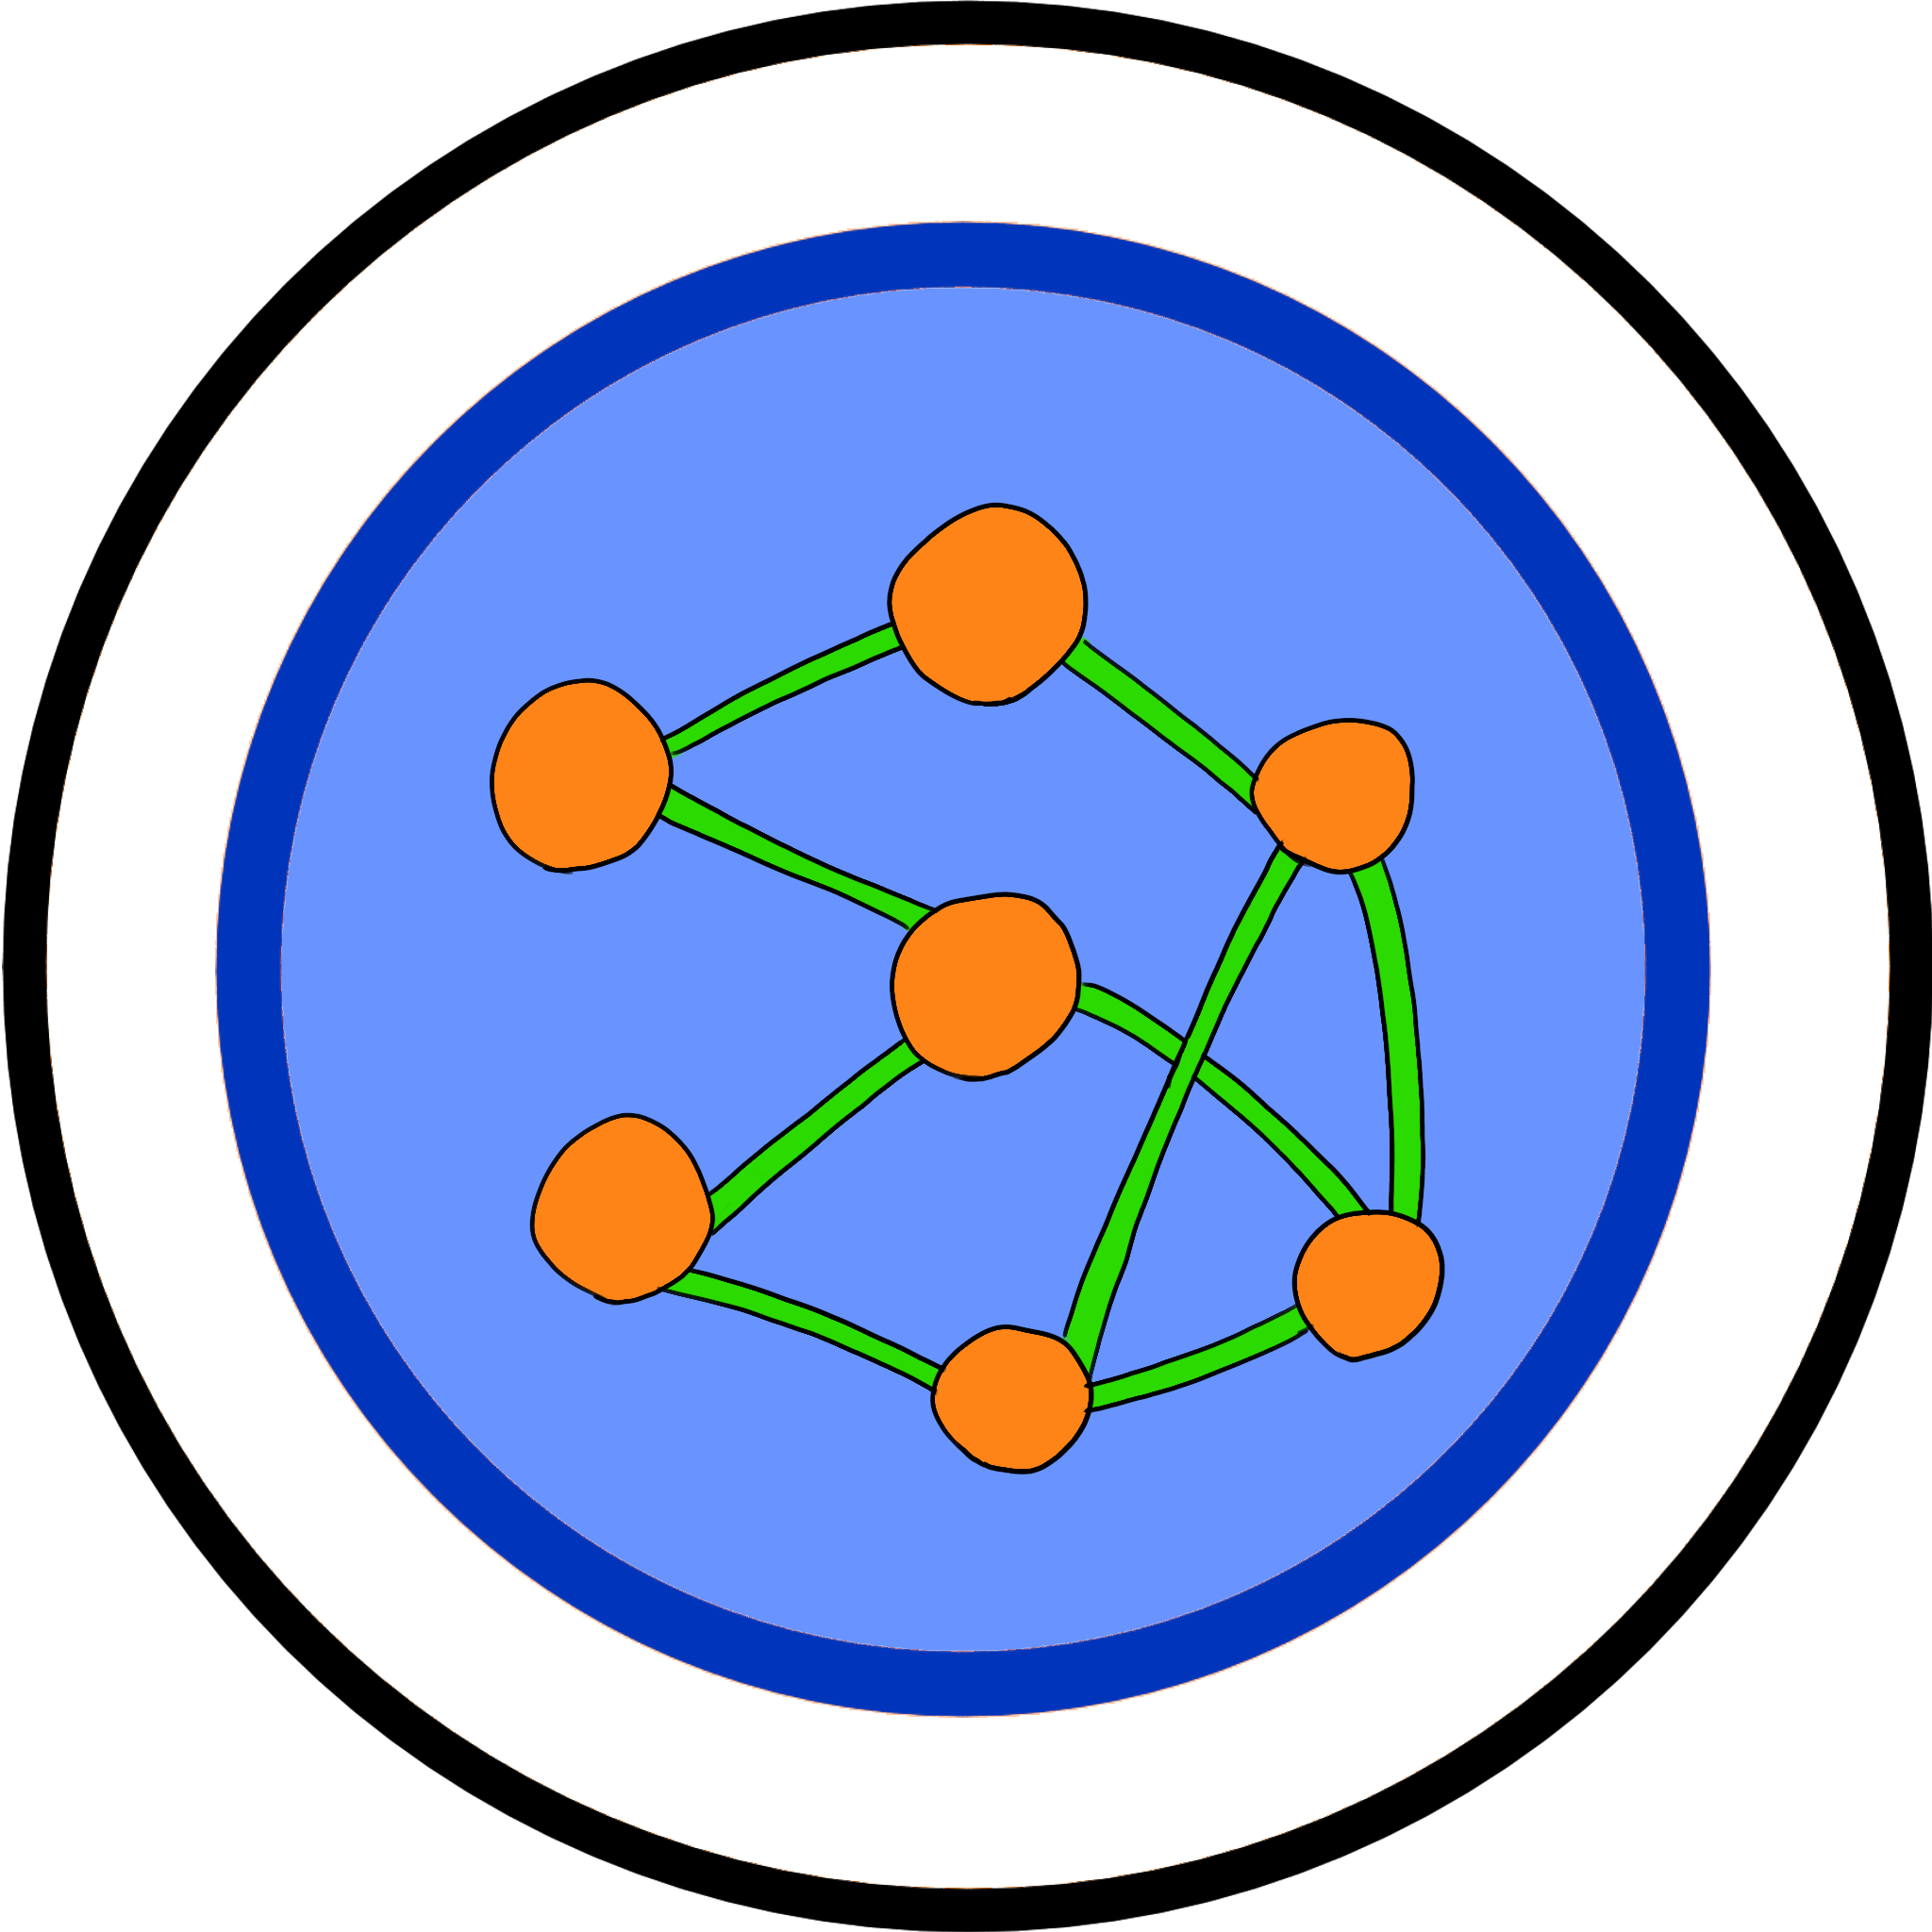 A small logo representing gop-net - consits of a simplistic rendition of a neural network.